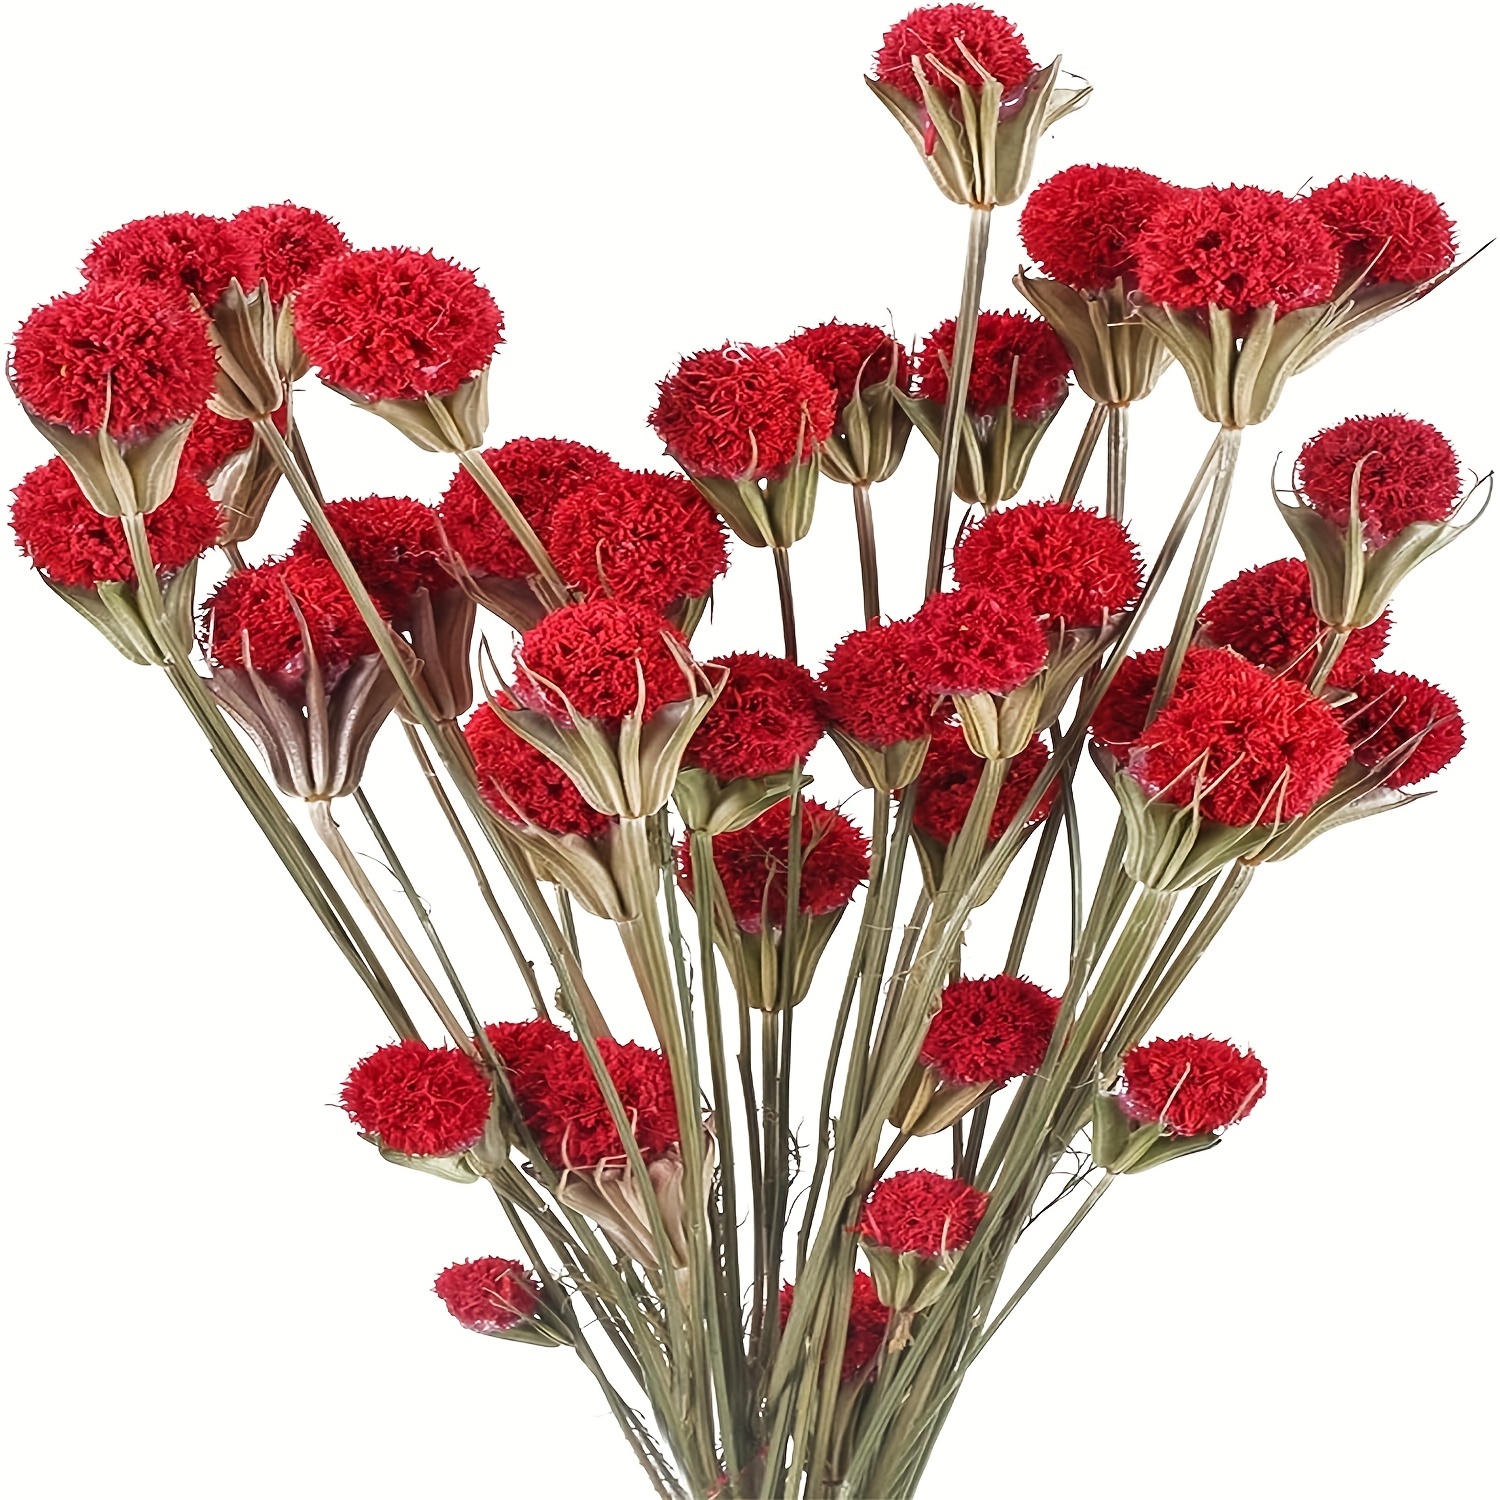  60 Pcs Red Dried Flowers for Vase Bouquet Bulk 16 Mini Billy  Ball Flowers Natural Fall Dried Pine Ball Flowers Eternal Life Flower with  Wedding Decor Bridal Shower Arrangement Party Home